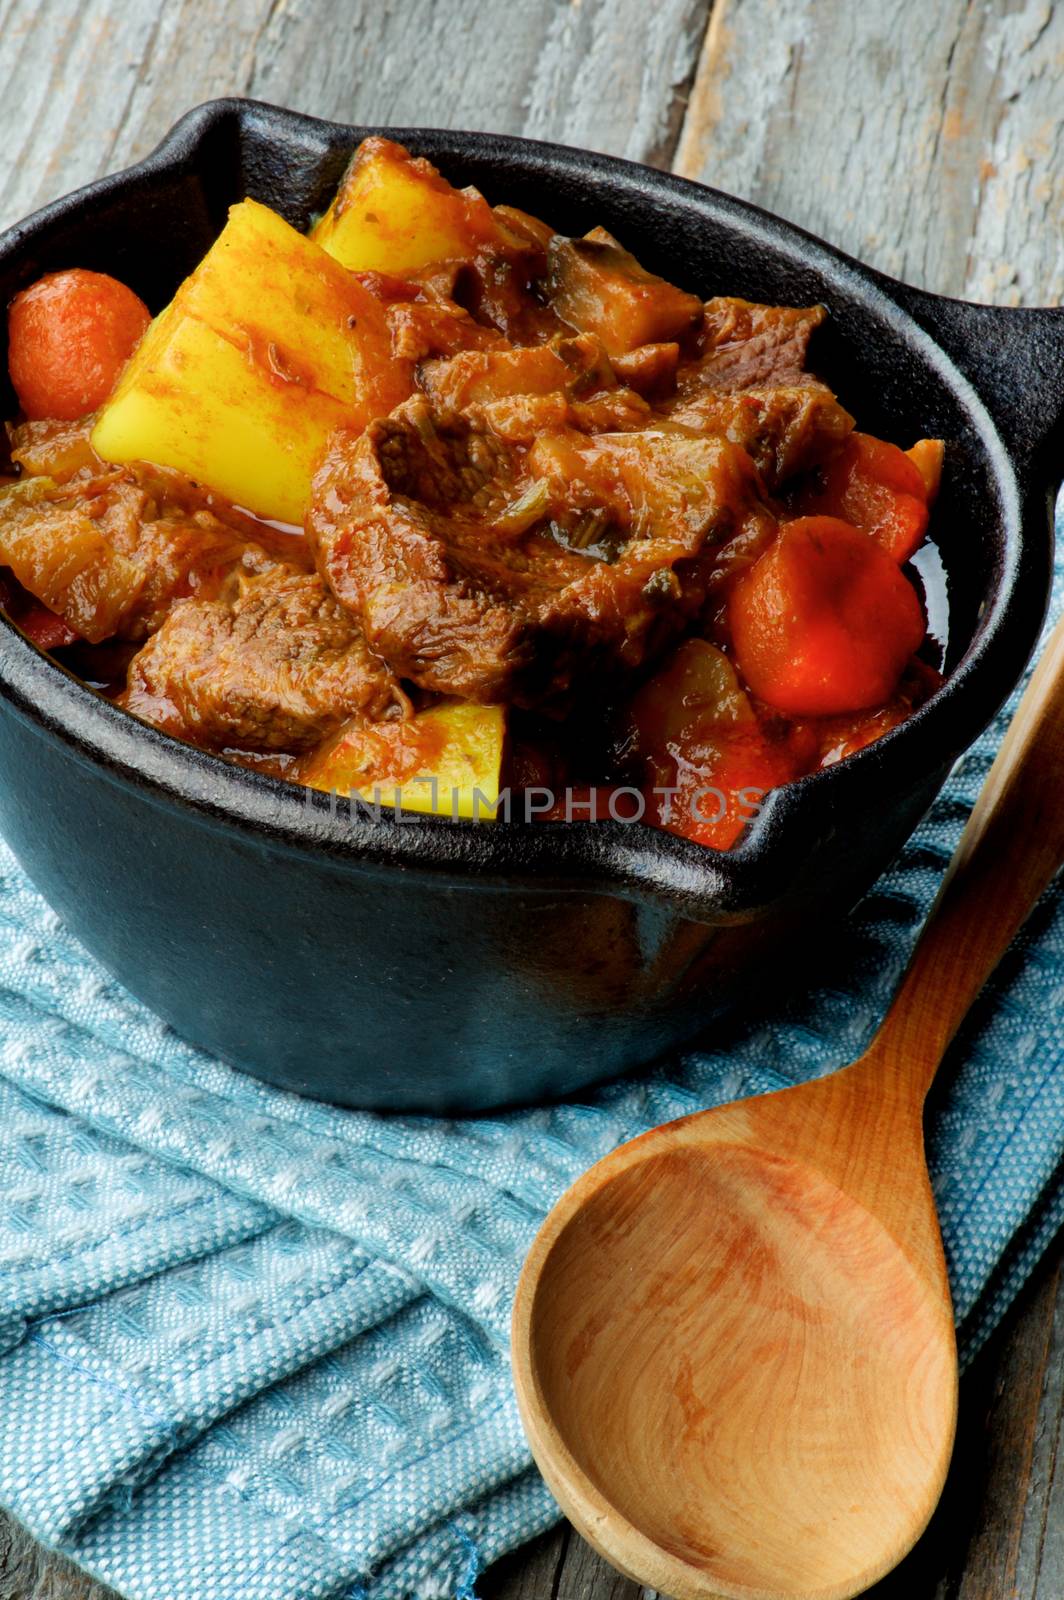 Homemade Beef Stew with Carrots, Potatoes, Celery and Leek in Cast Iron closeup on Blue Napkin with Wooden Spoon 